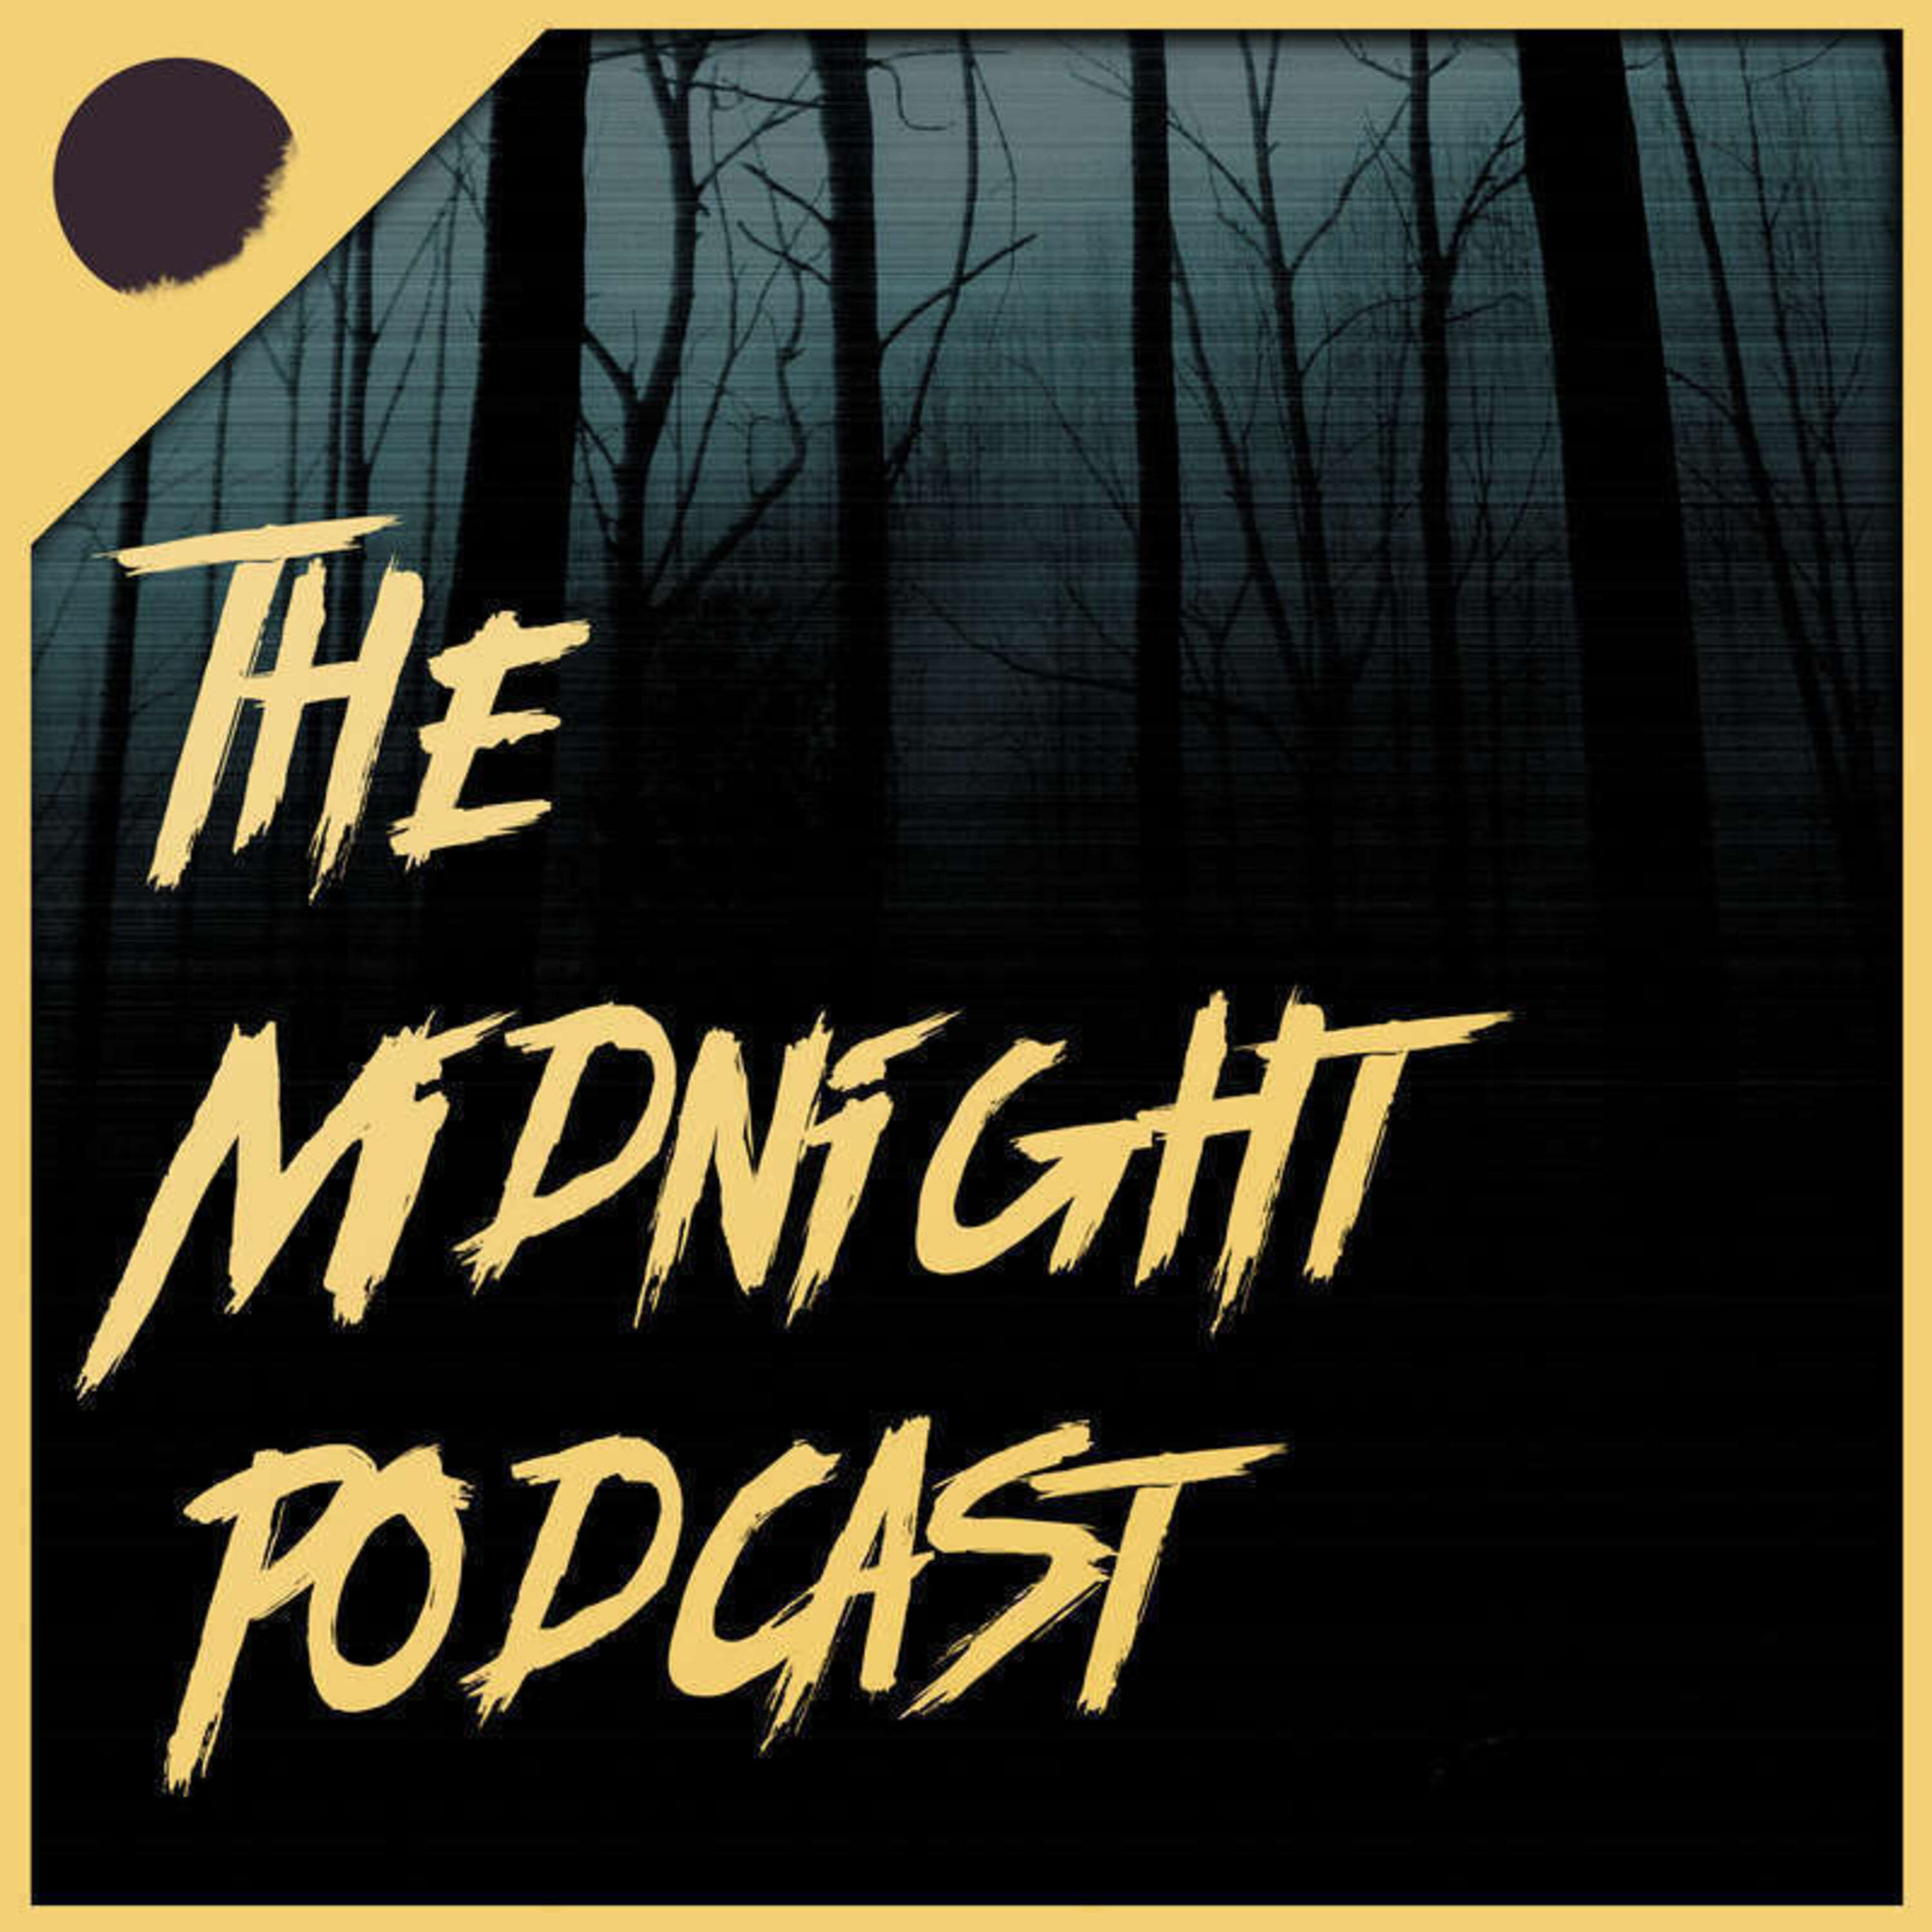 Episode 125 | There's a strange newspaper that's only delivered at midnight | Part 11